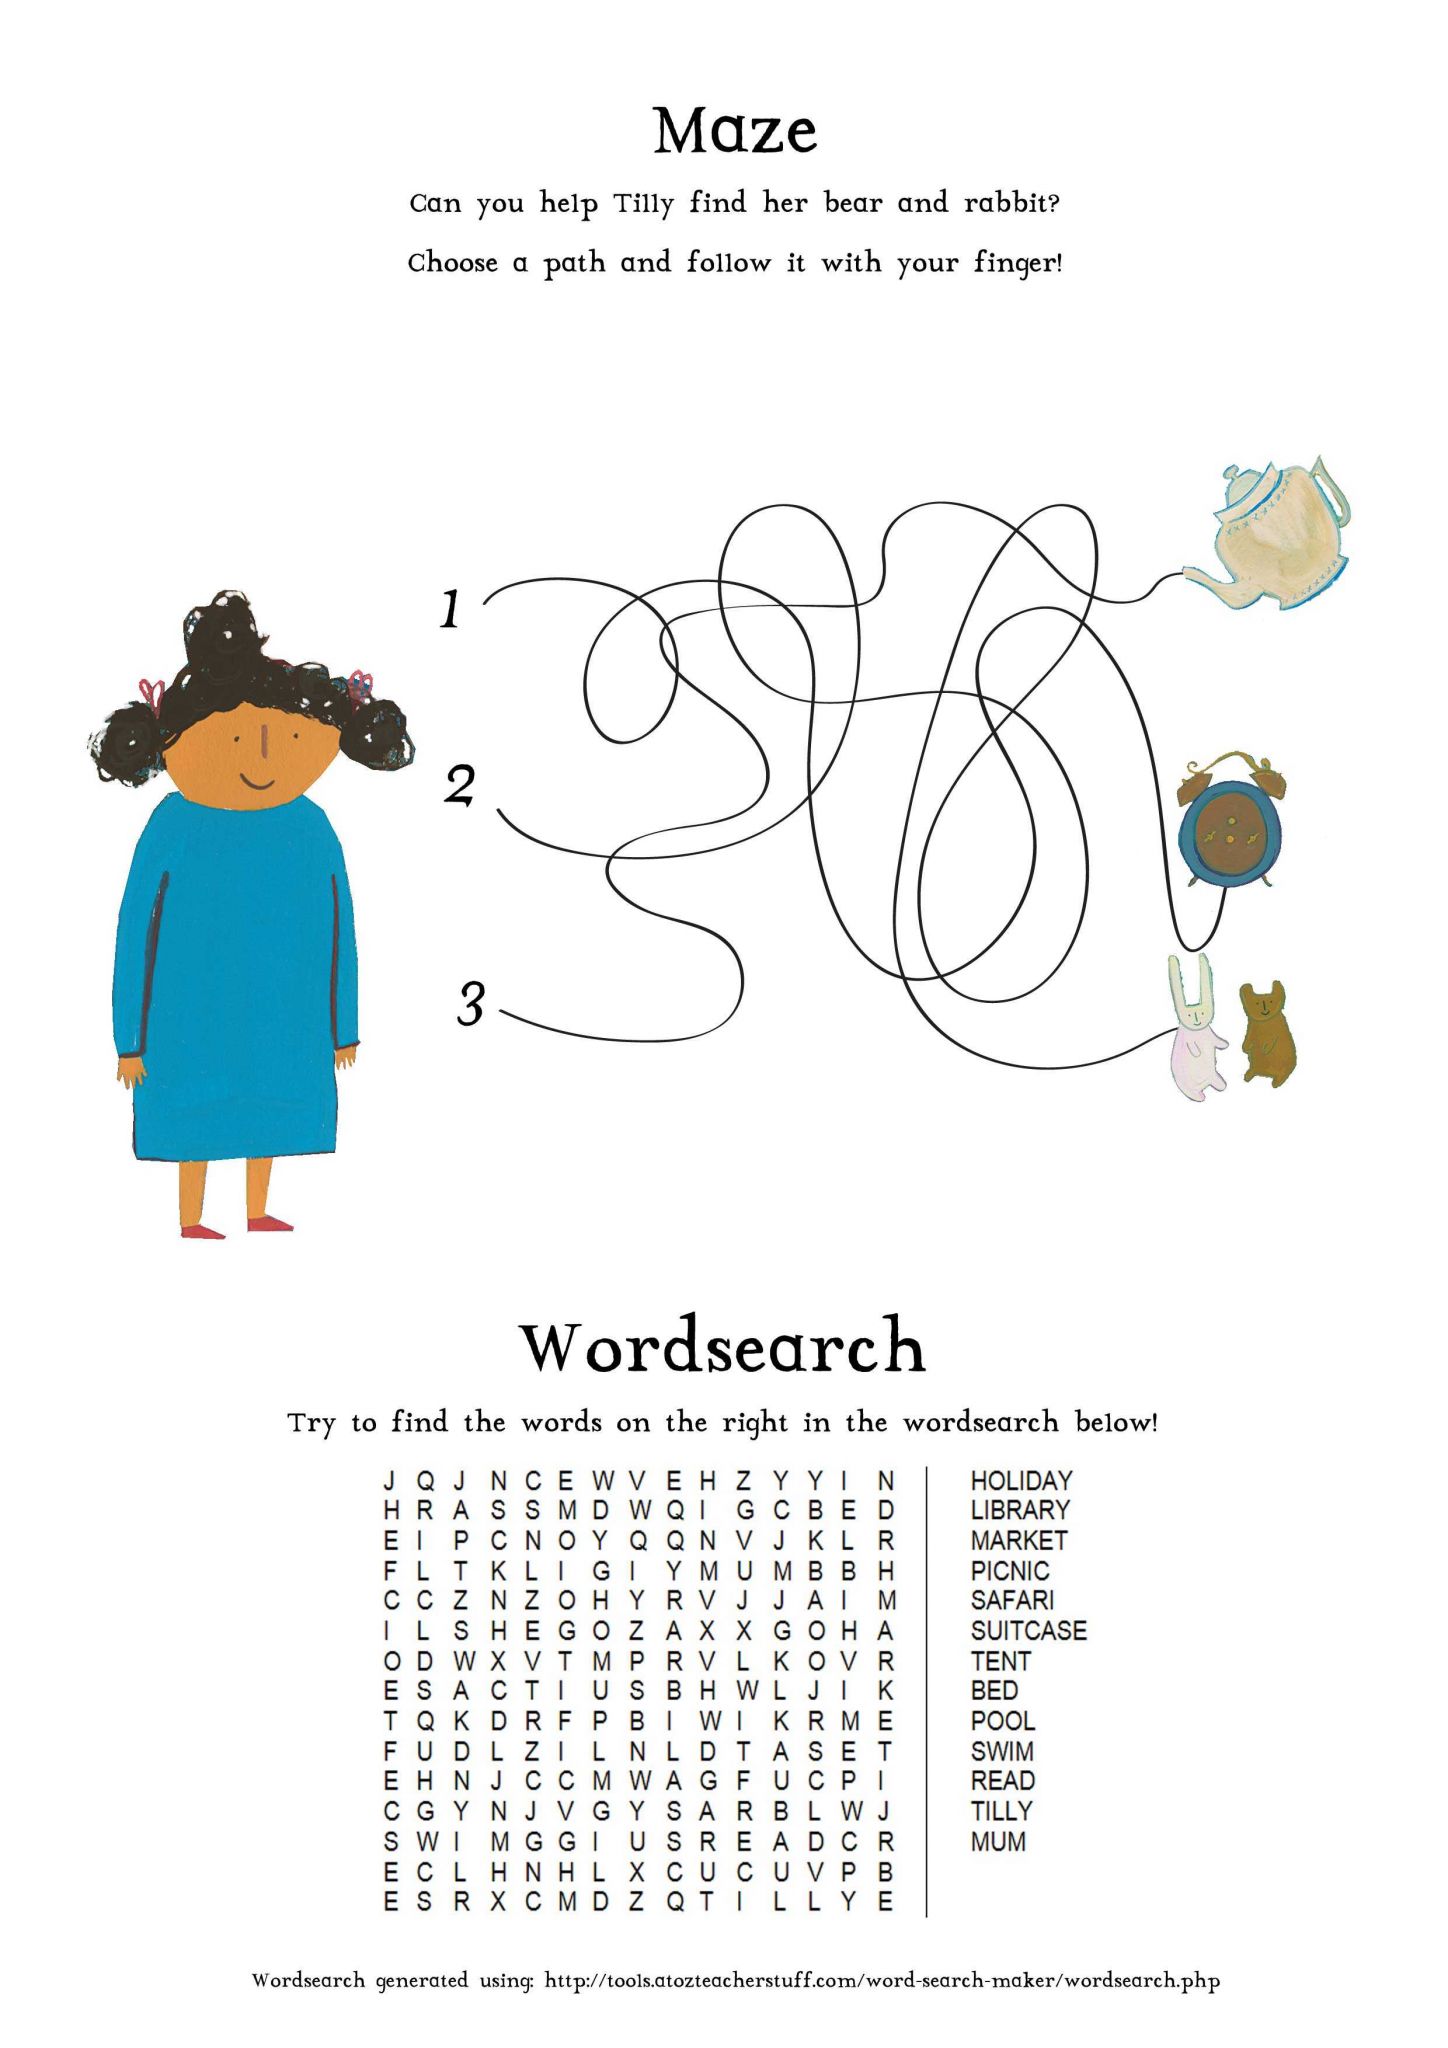 Realism and Fantasy Worksheets for Kindergarten Also Realism and Fantasy Worksheets for Kindergarten Awesome 12 Best